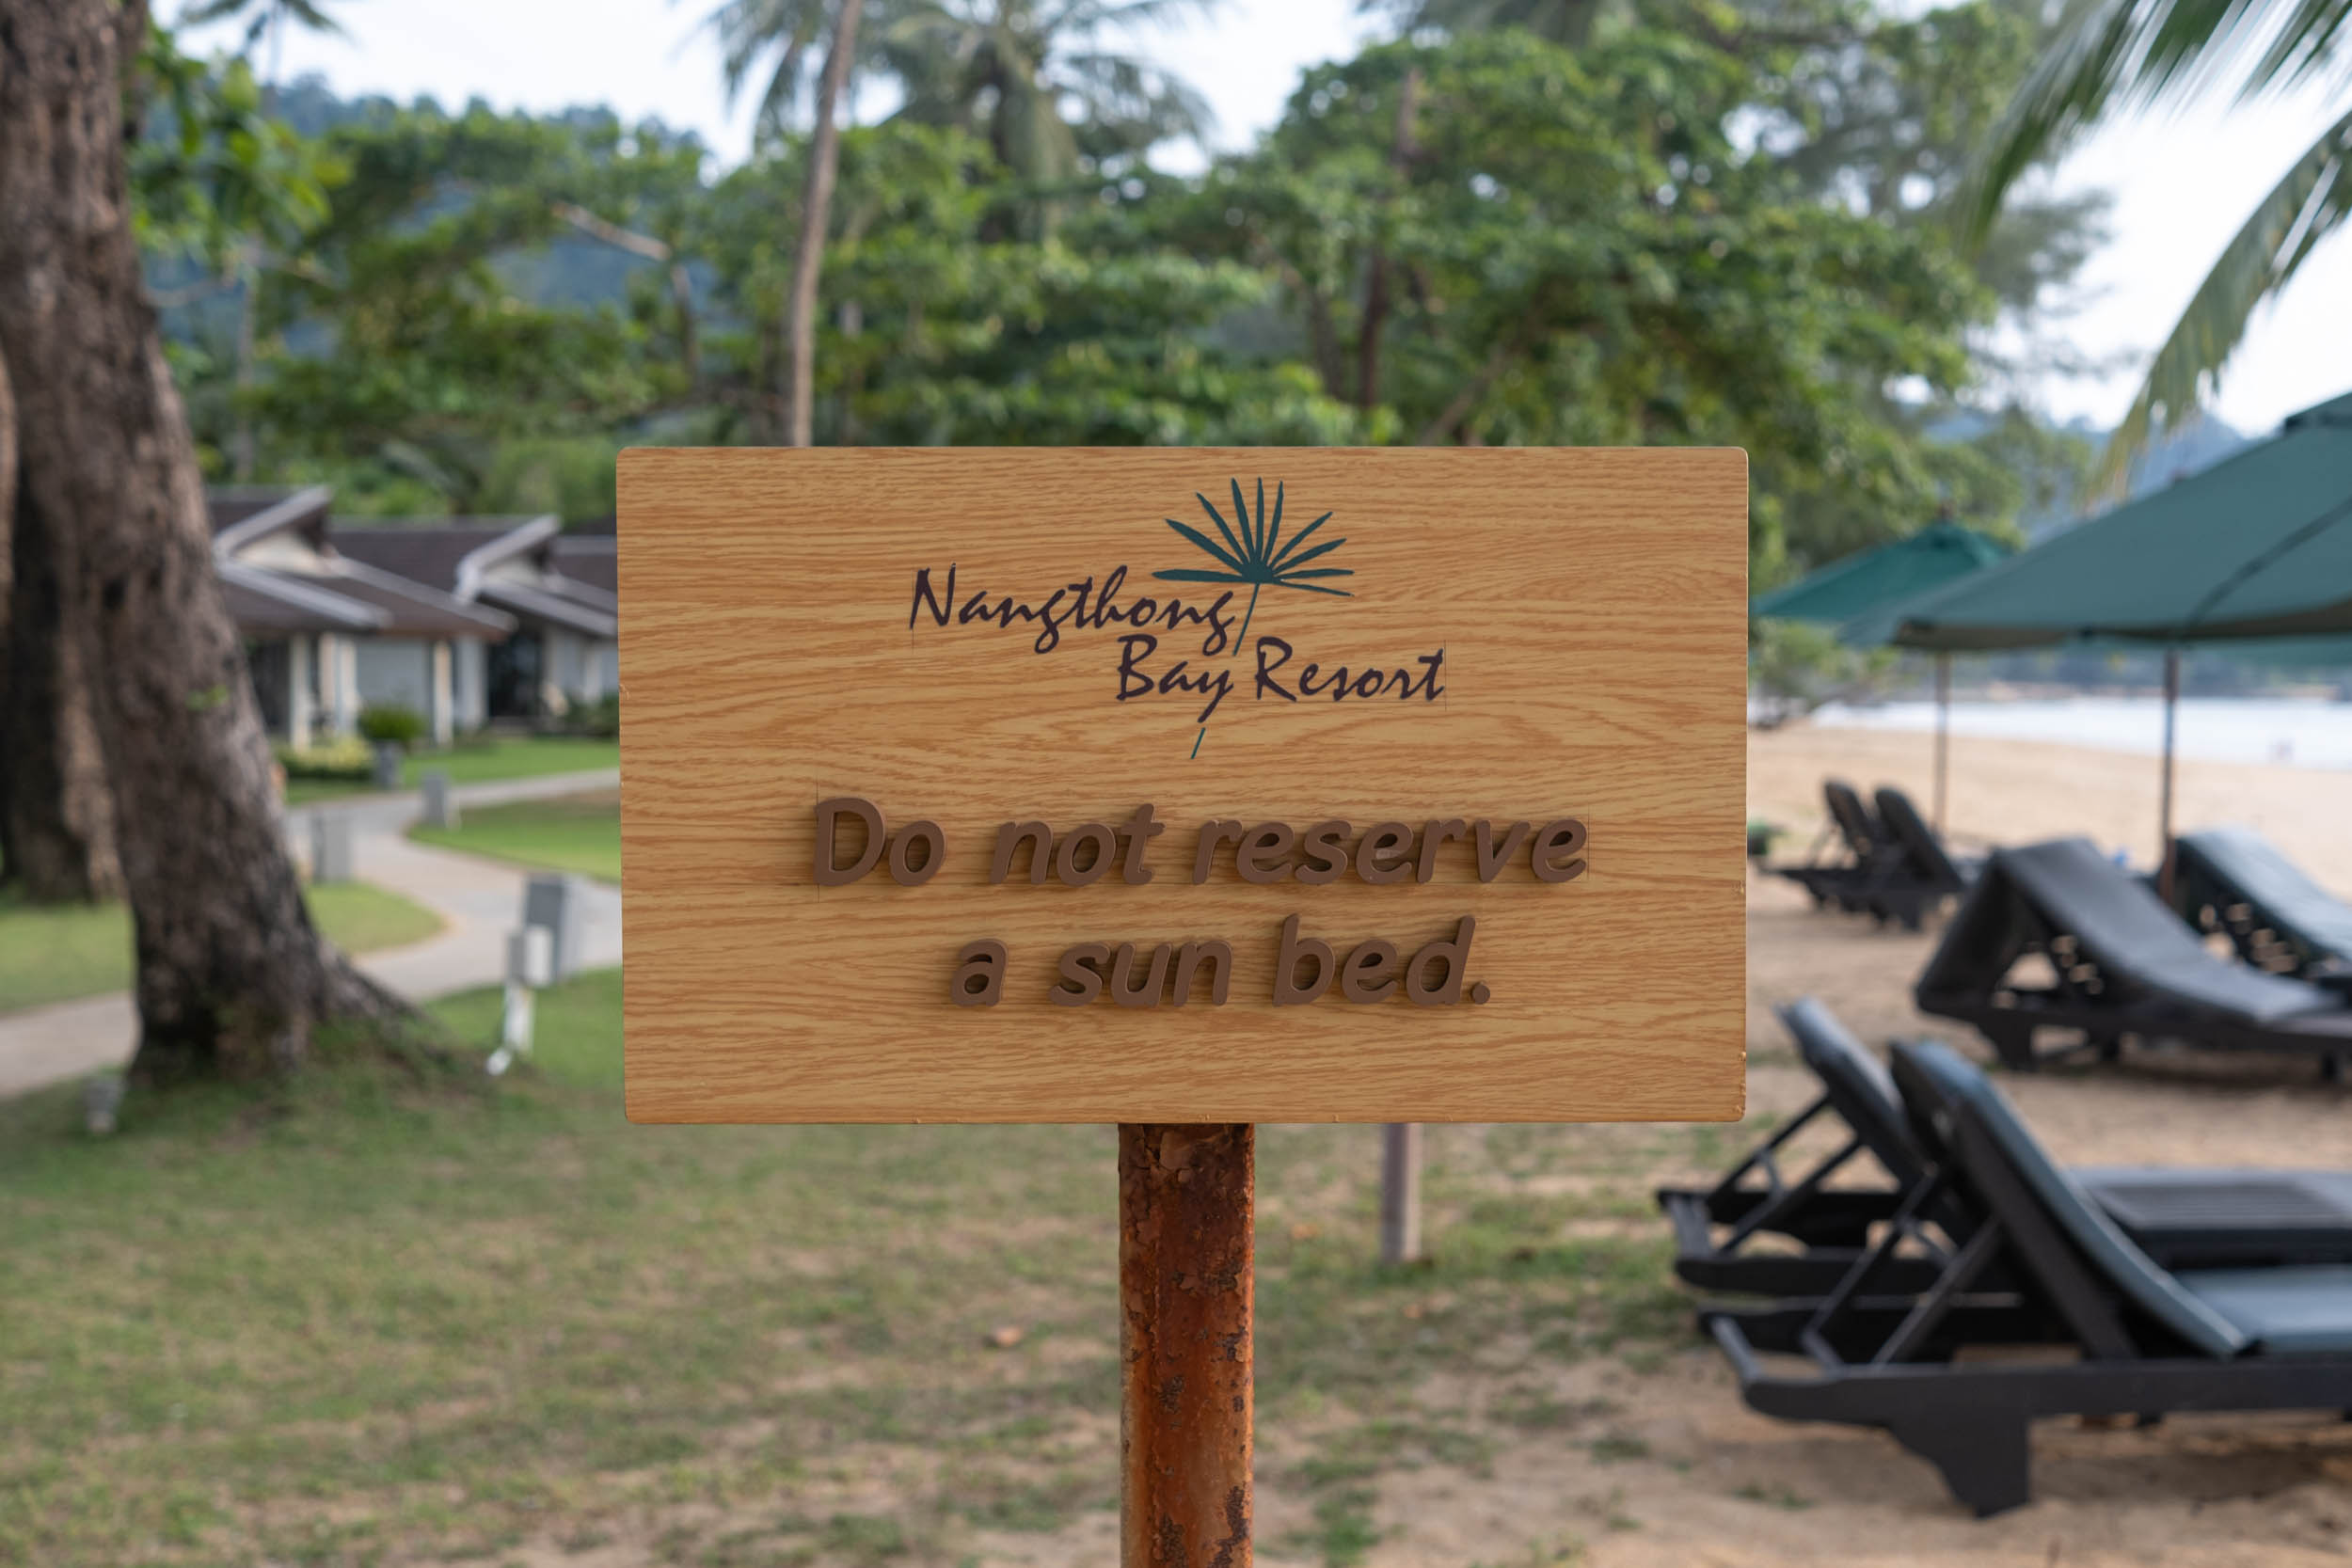 A sign by the beach: "Do not reserve a sun bed."